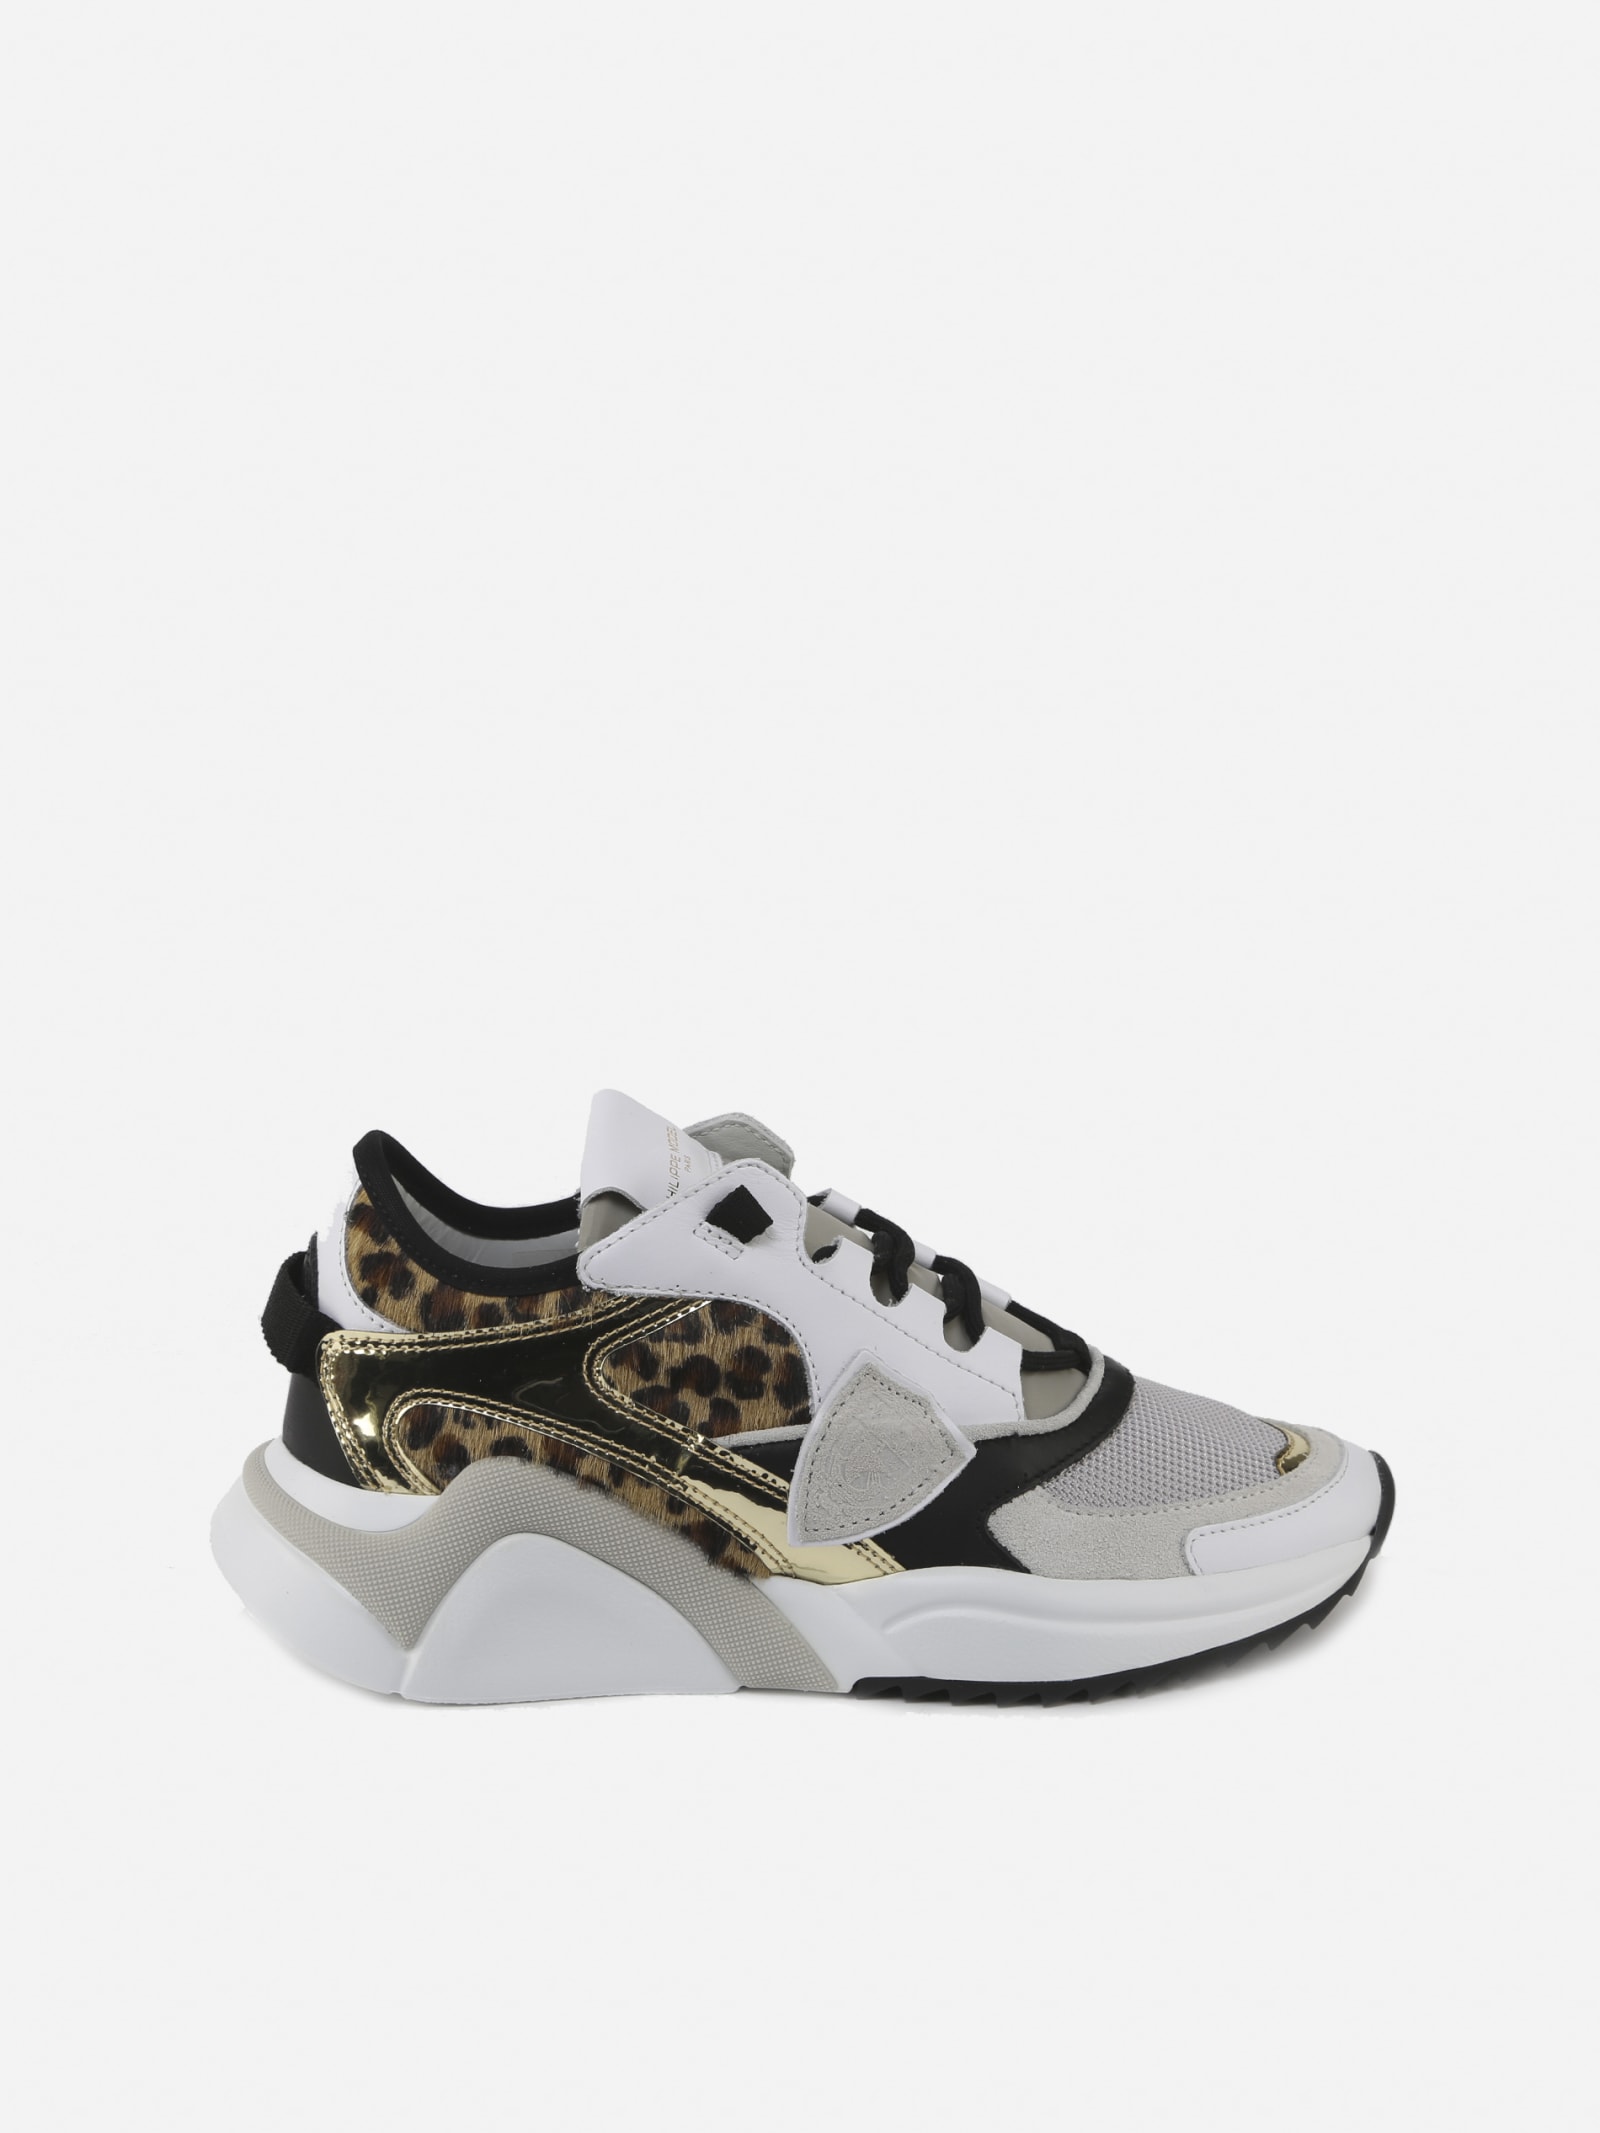 Philippe Model Eze Sneakers With Animalier Details